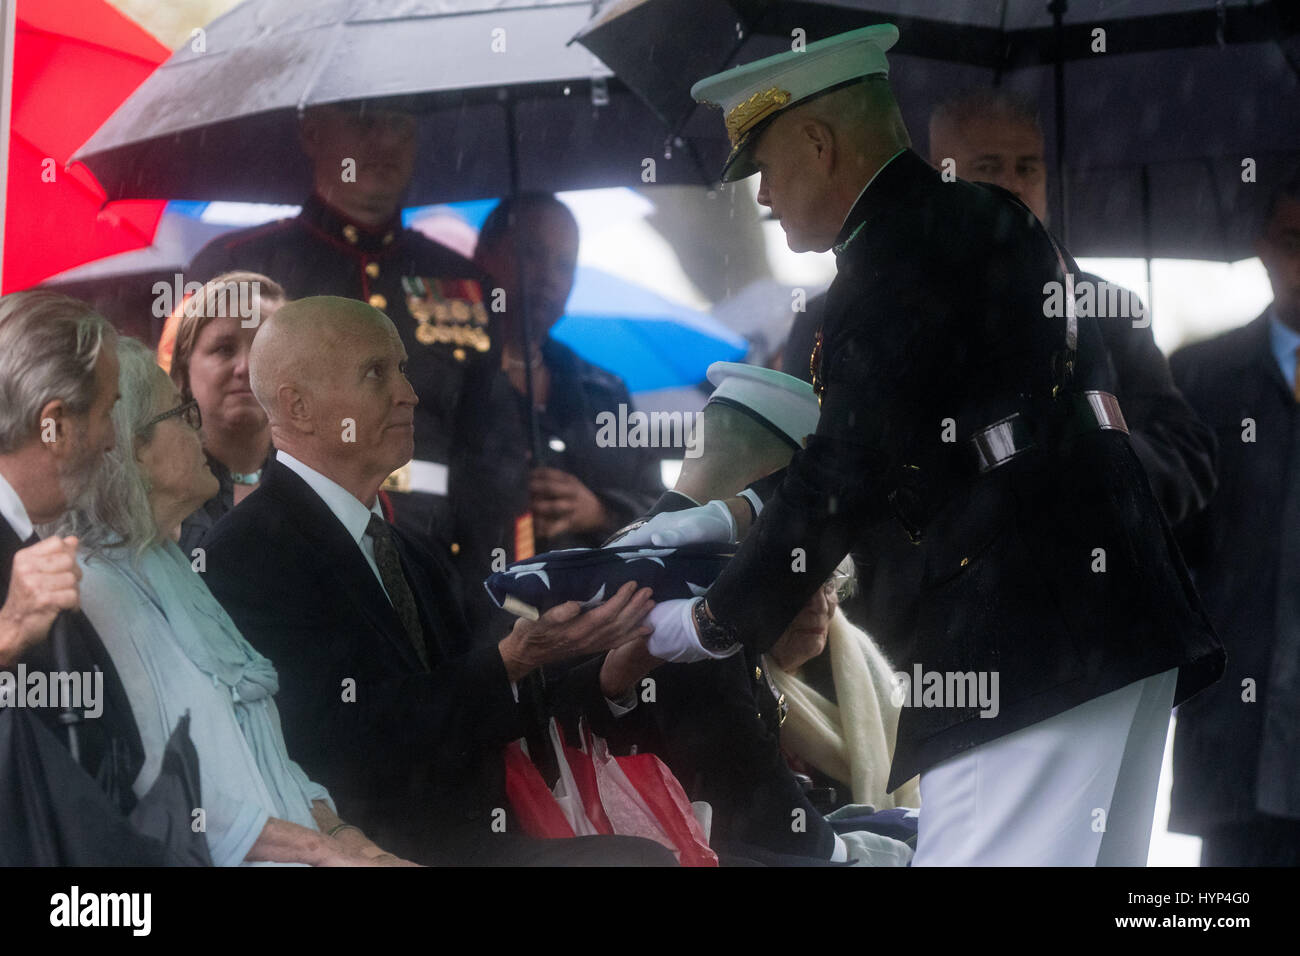 Arlington, United States Of America. 06th Apr, 2017. Commandant of the Marine Corps Gen. Robert Neller, right, presents the American flag to David Glenn, son of John Glenn, during the graveside service in Section 35 of Arlington National Cemetery April 6, 2017 in Arlington, Virginia. Glenn, the first American astronaut to orbit the Earth and later a United States senator, died at the age of 95 on December 8, 2016. Credit: Planetpix/Alamy Live News Stock Photo